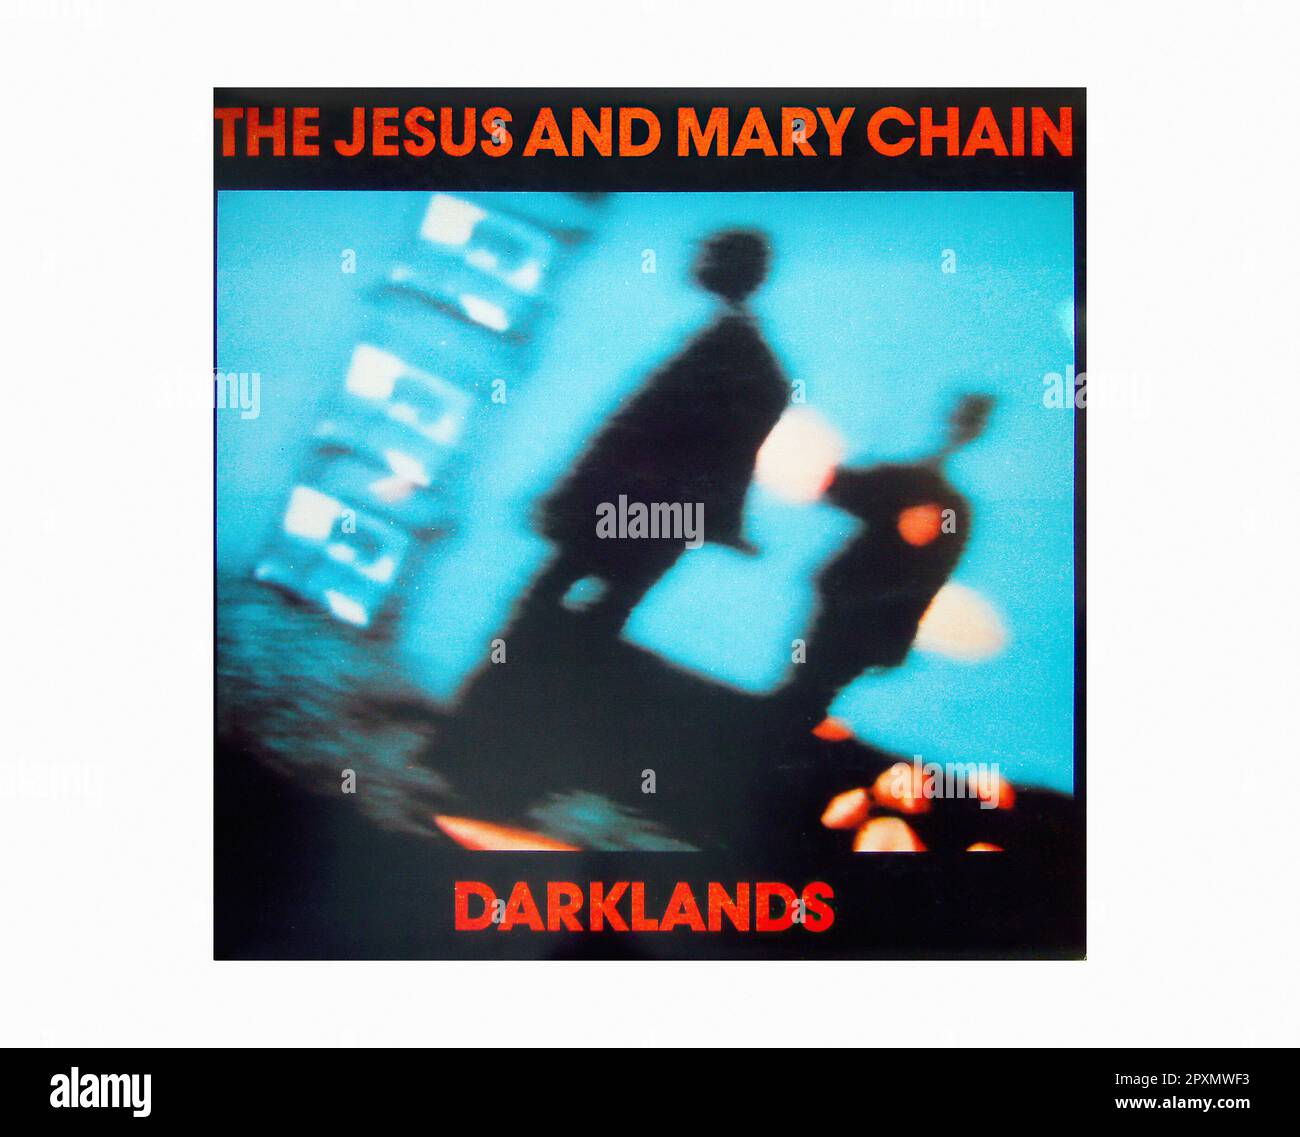 The Jesus and Mary Chain - Darklands [1987] - Vintage Vinyl Record Sleeve Banque D'Images